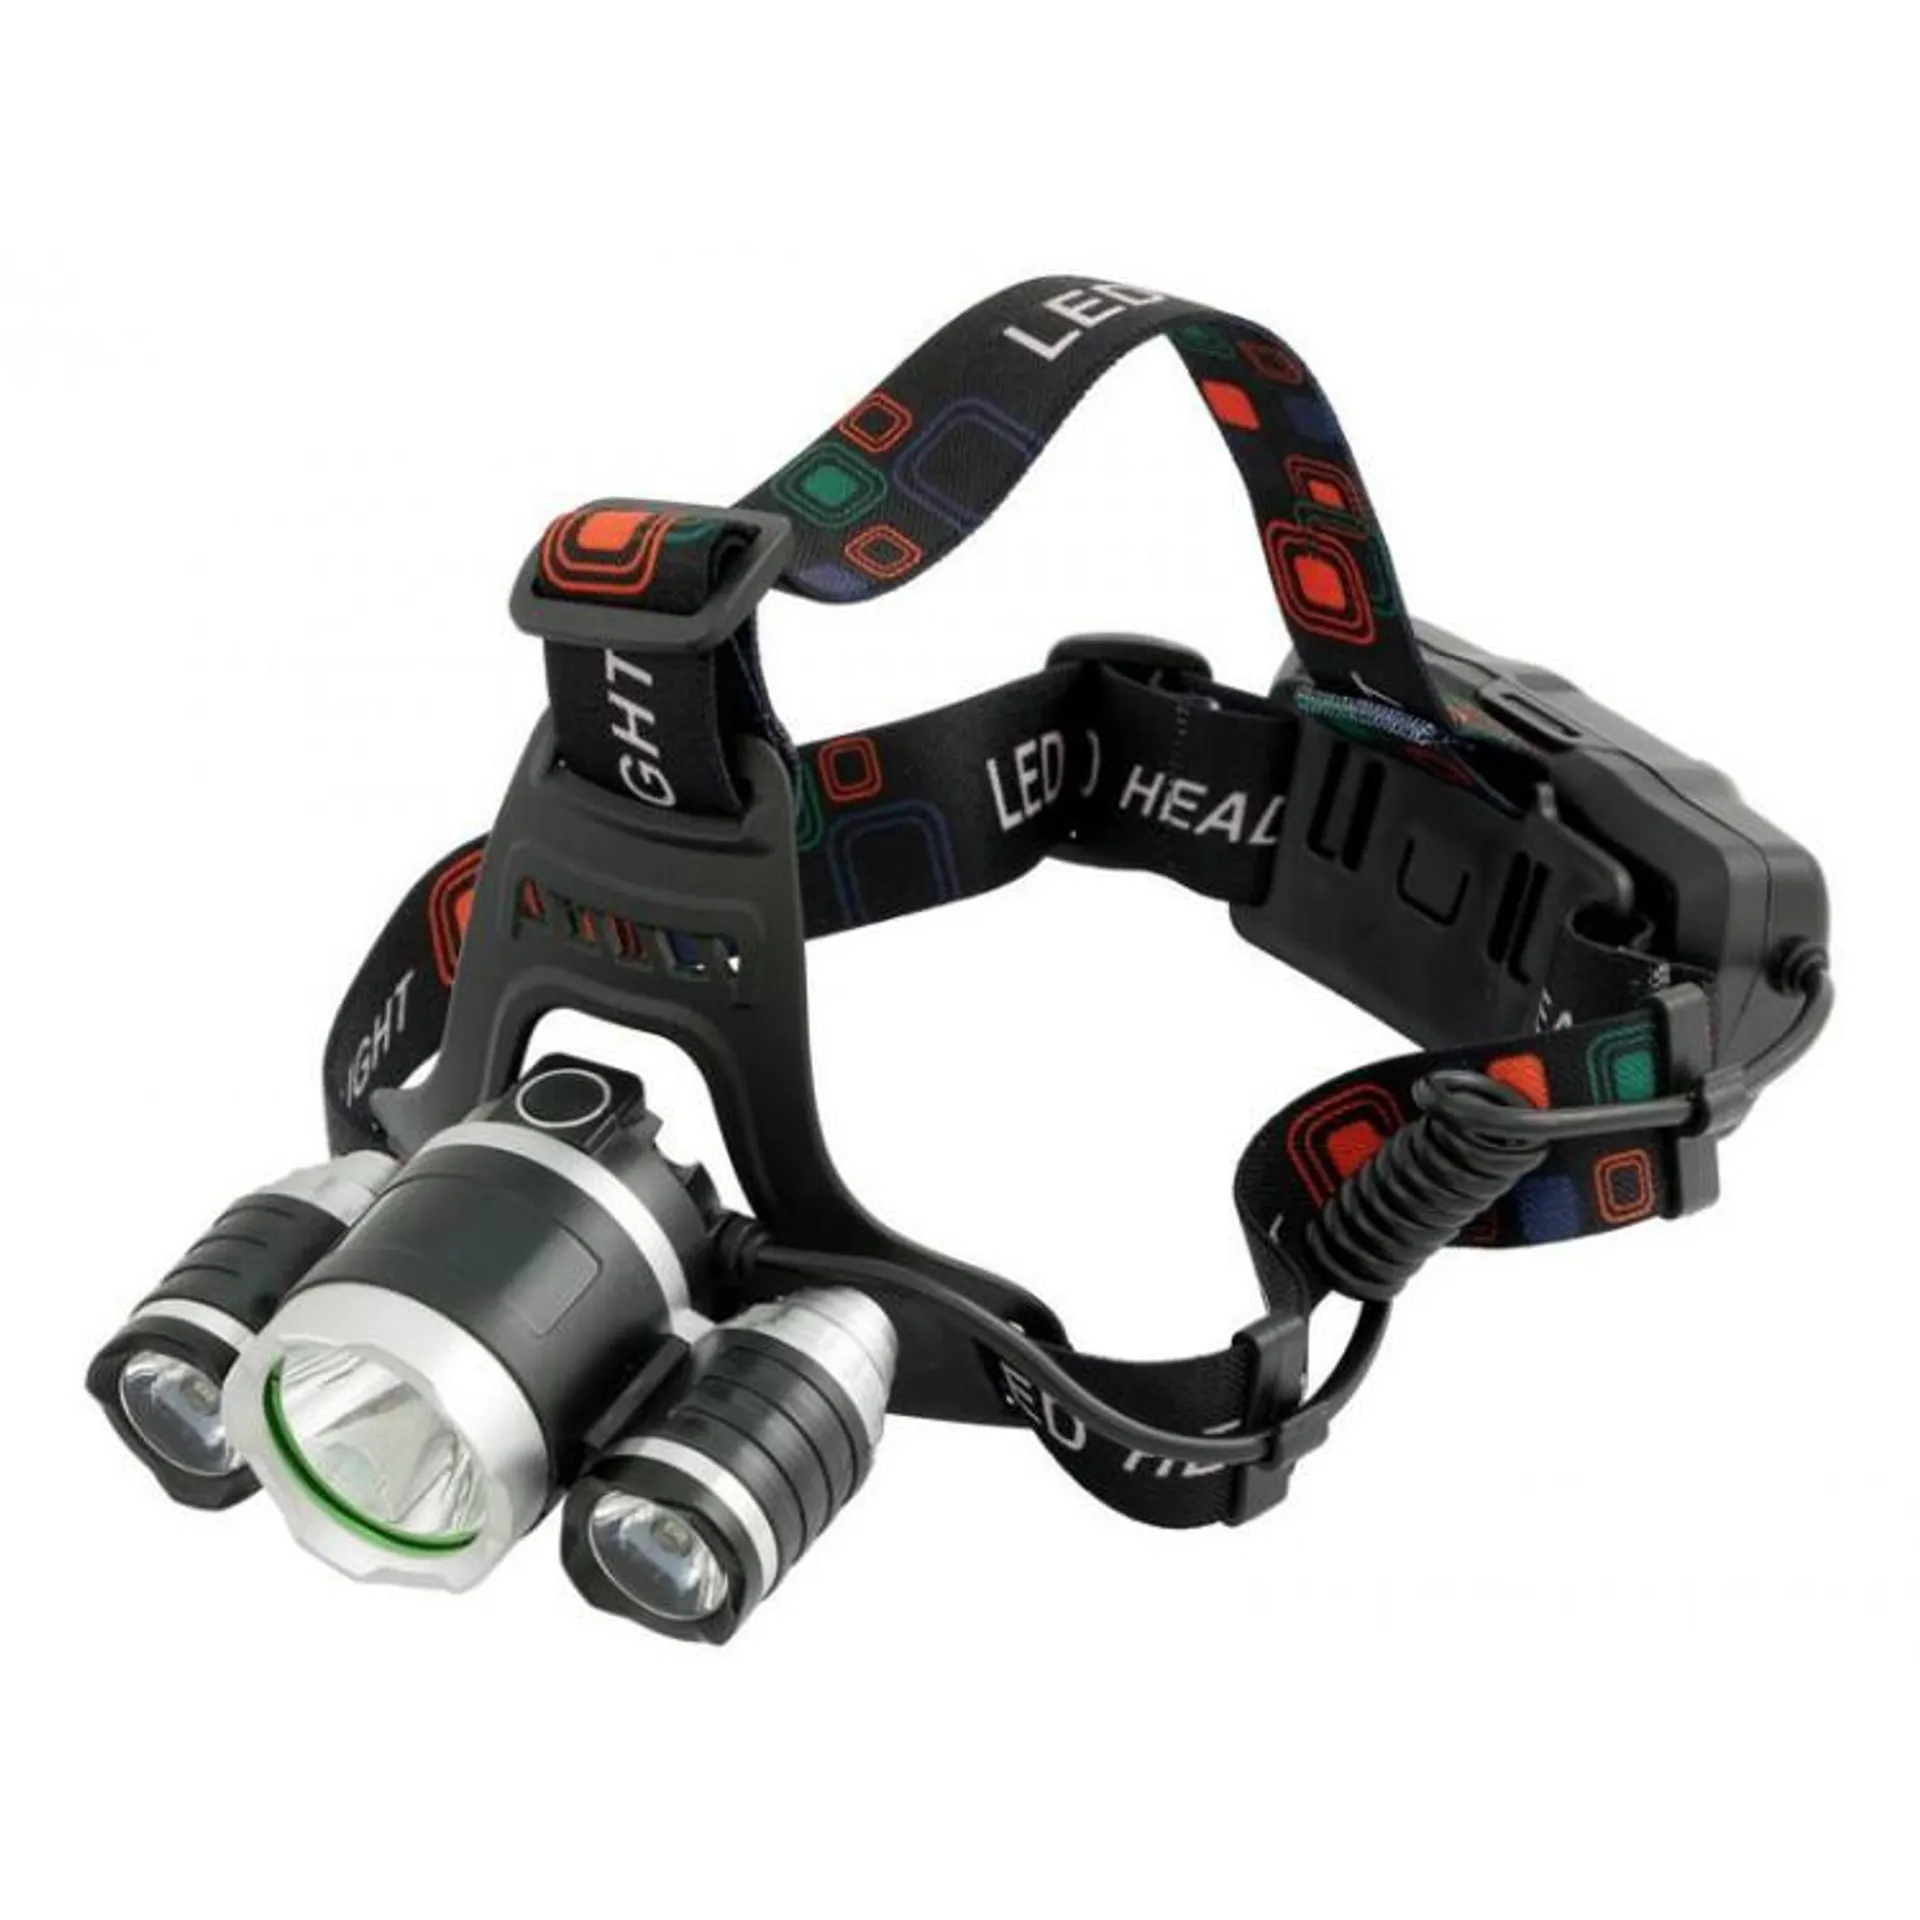 High Power Zoom Headlamp Torch - 3 LED Bulbs - Rechargeable